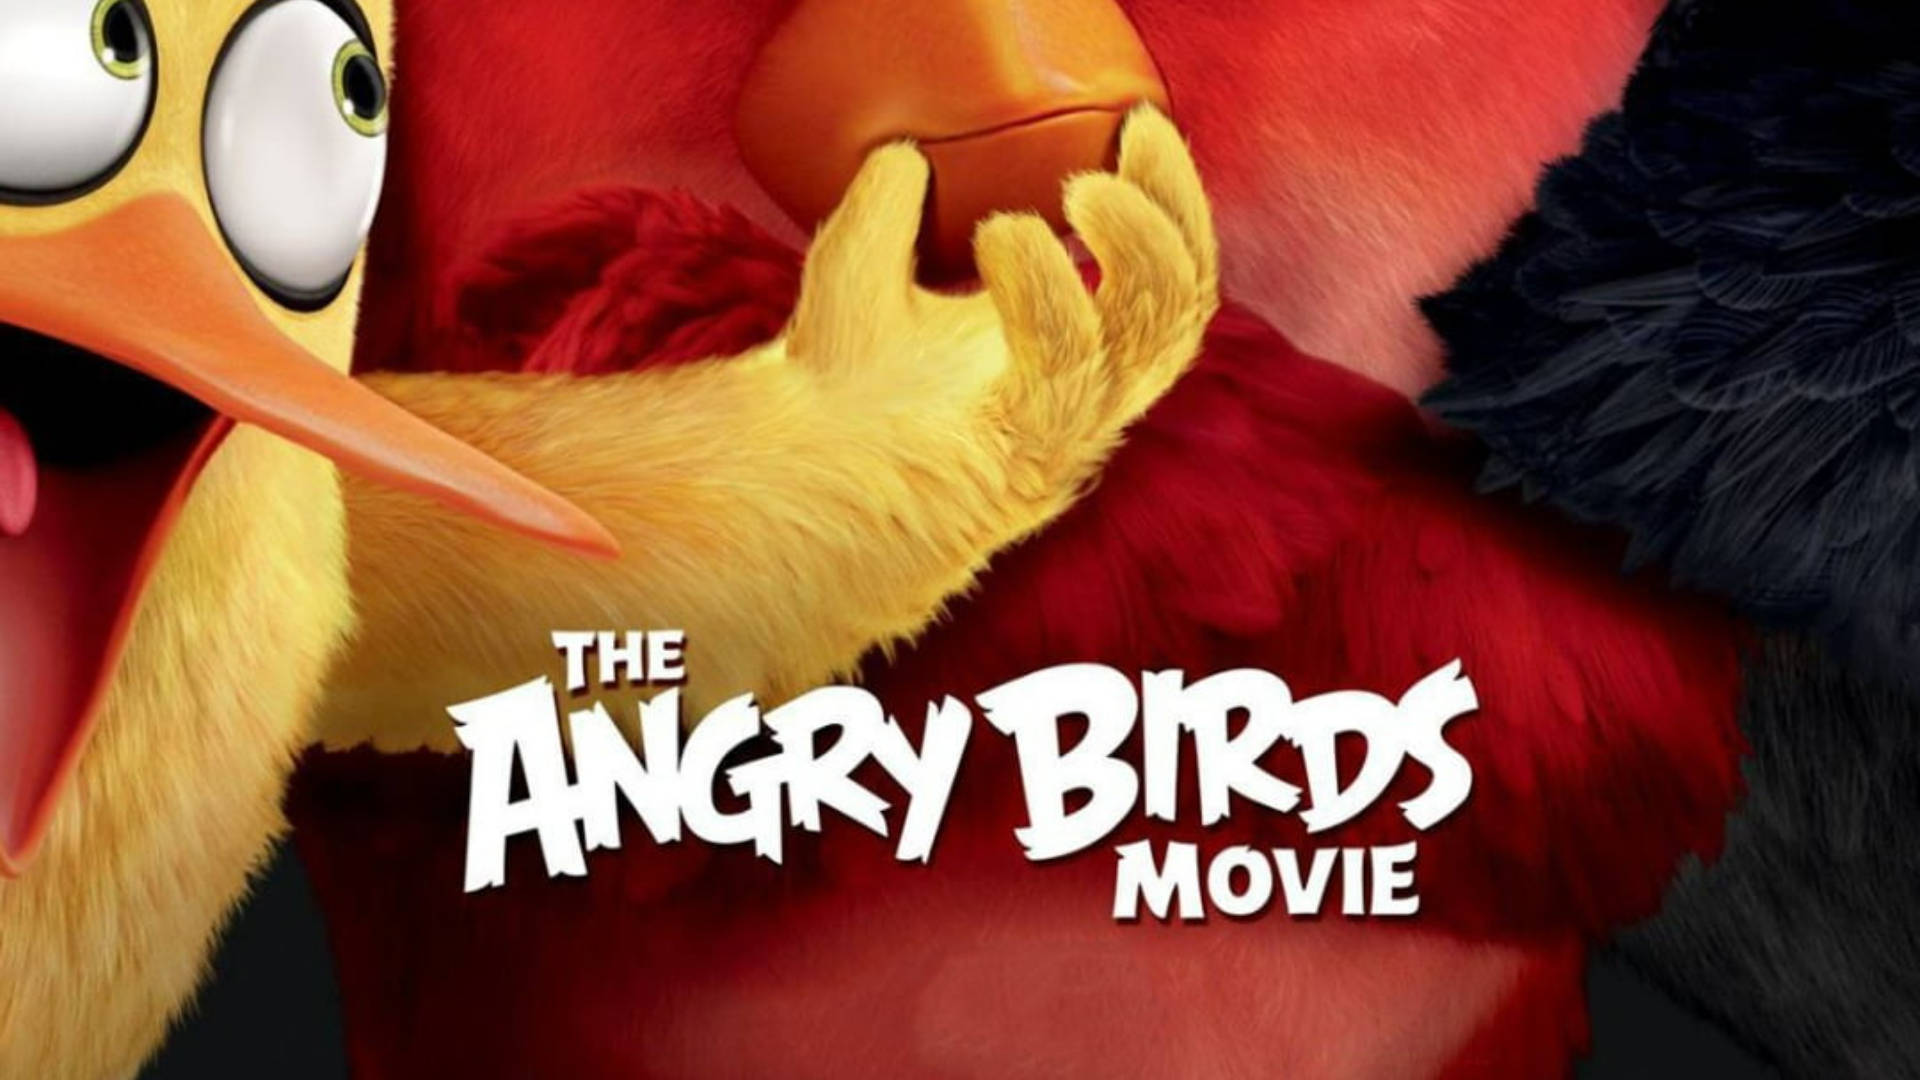 Movie Poster Of The Angry Birds Movie Wallpaper